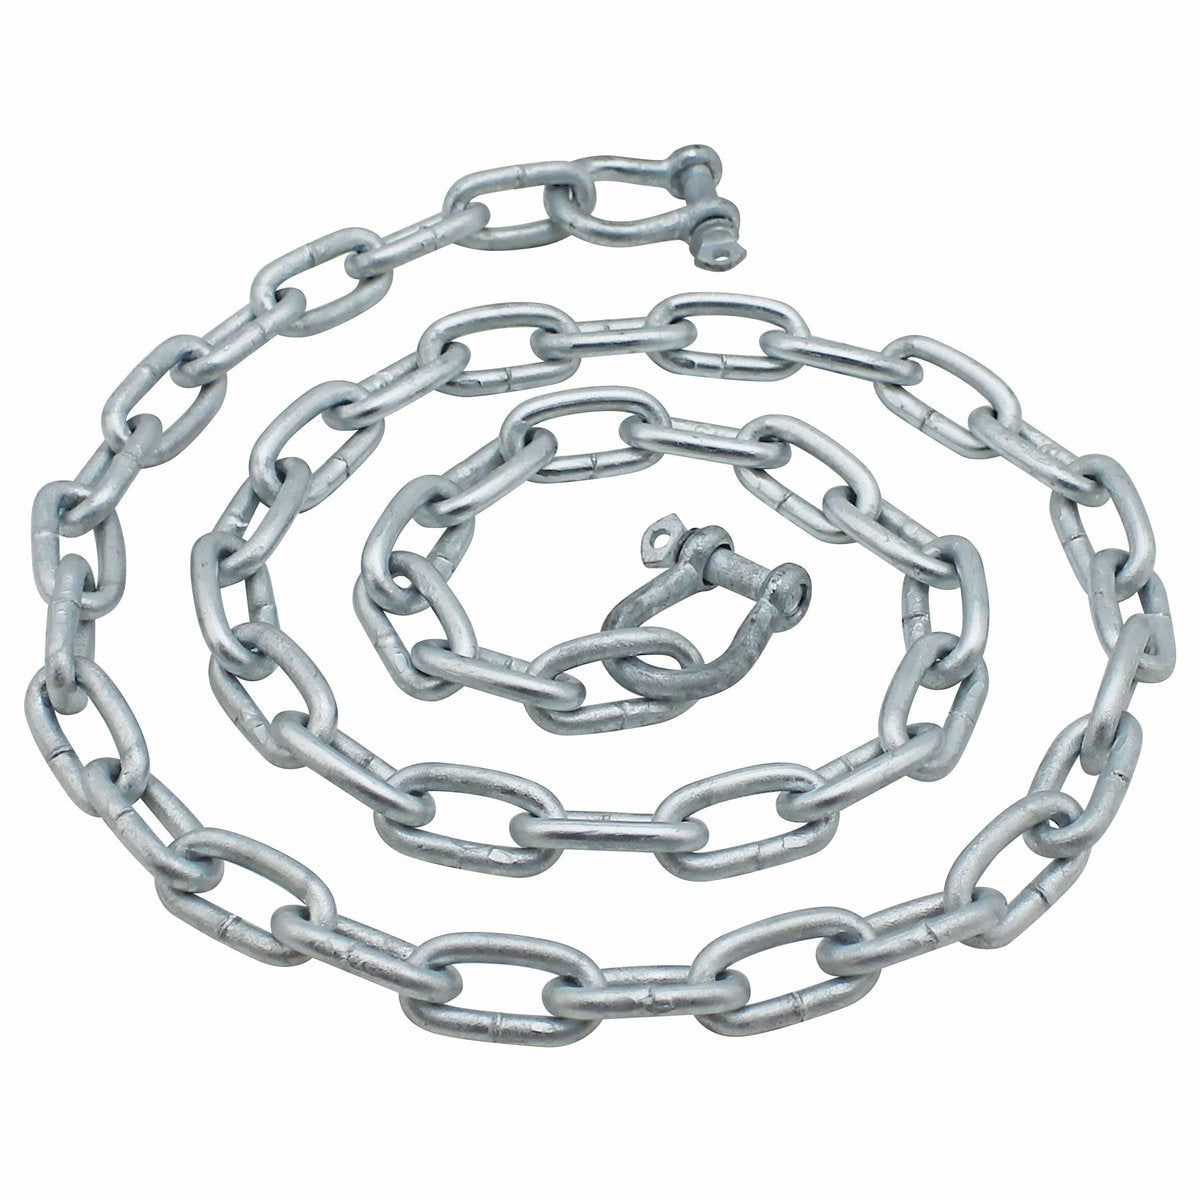 Extreme Max Galv Anchor Chain 3/16" 4' 1/4" with Shackles #3006.6566